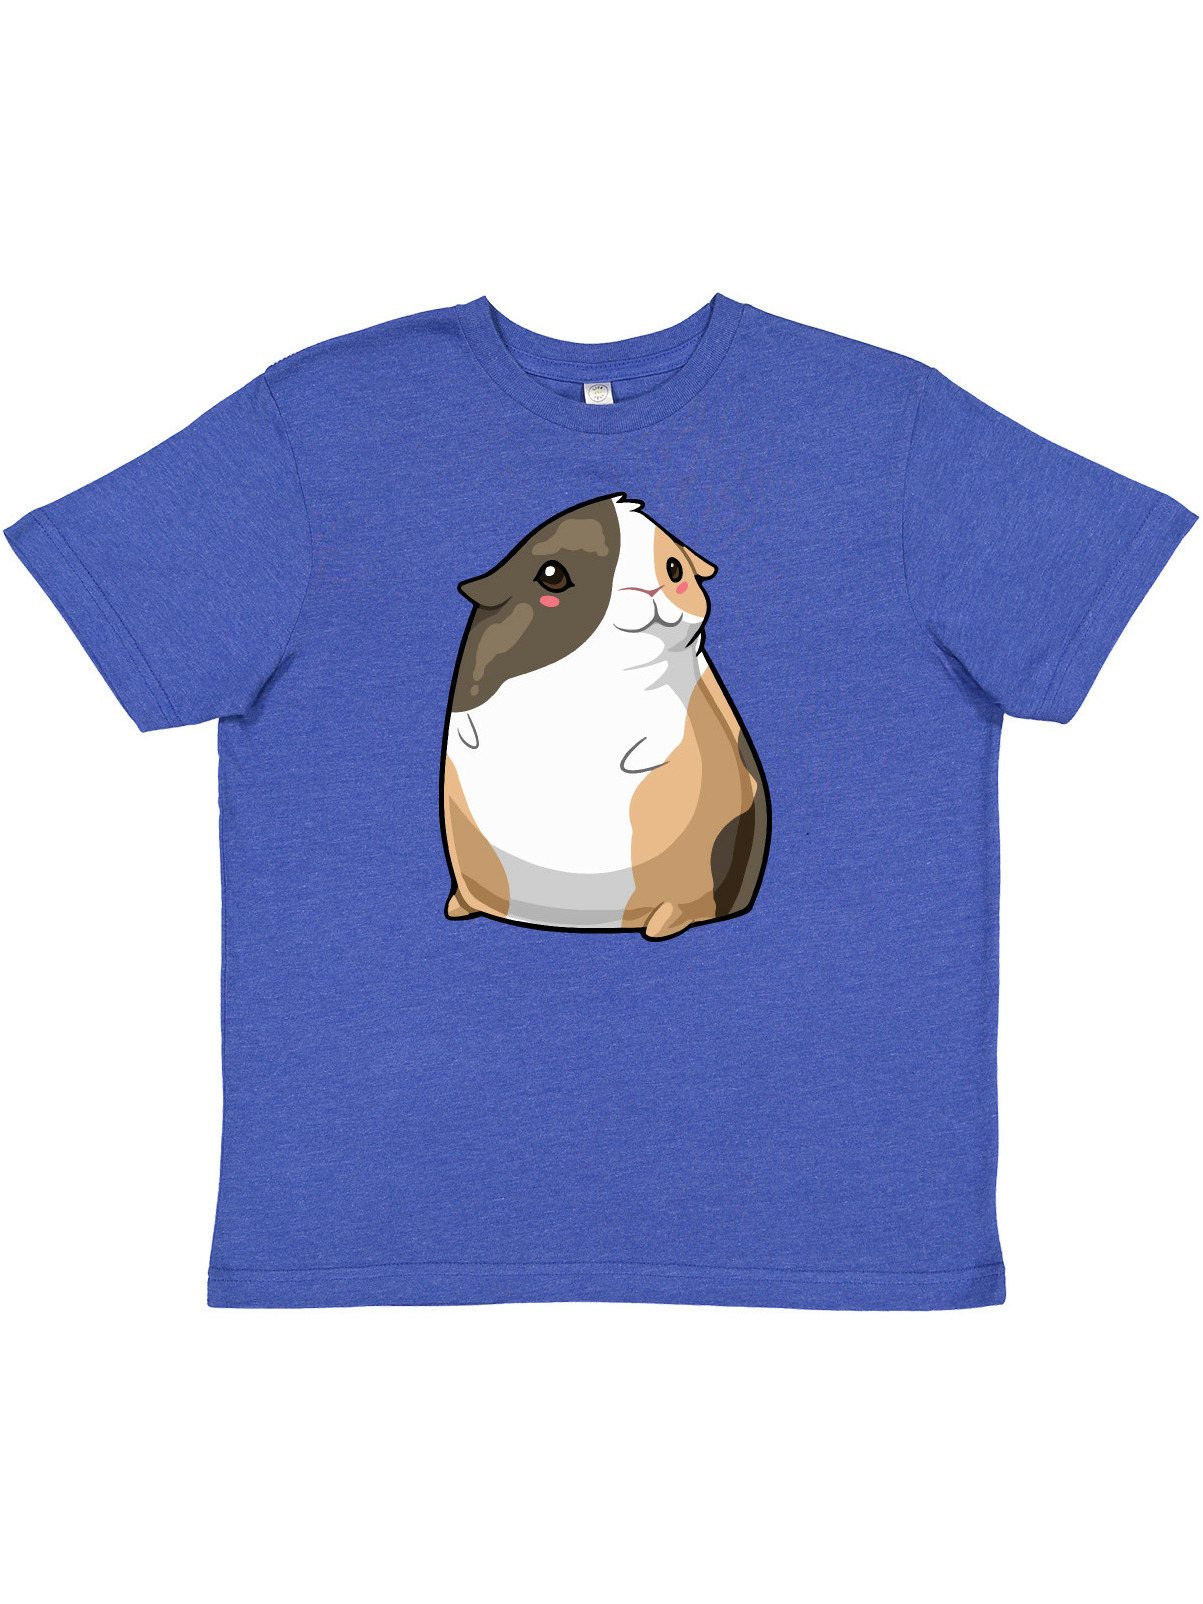 Inktastic Cute Short Hair Guinea Pig Youth T-Shirt - image 1 of 4